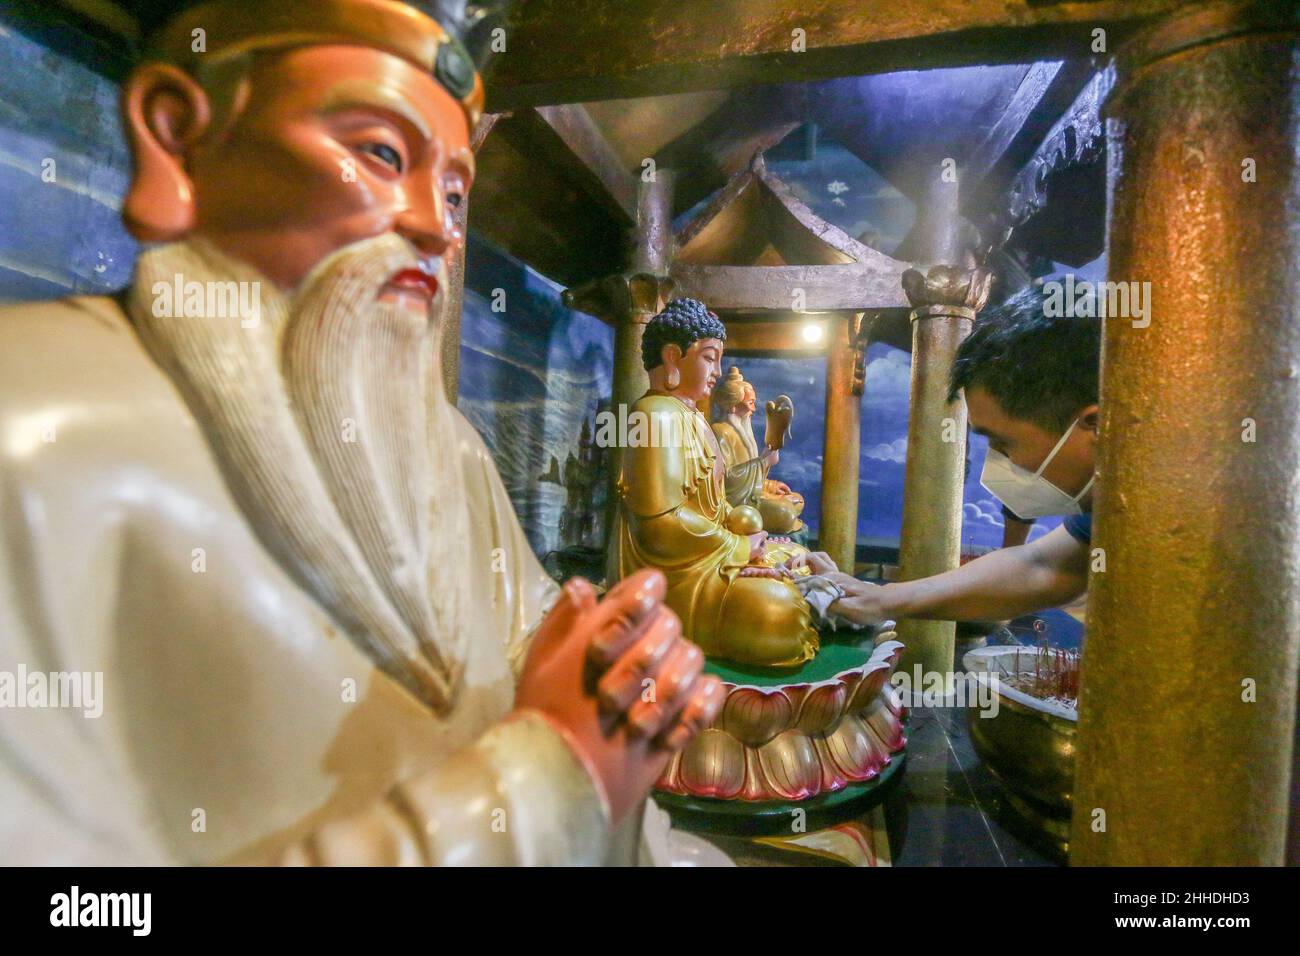 the tradition of cleaning altars and statues of gods at the Buddhist Dharma & 8 Pho Sat monastery welcoming the Chinese New Year in Bogor, Indonesia Stock Photo